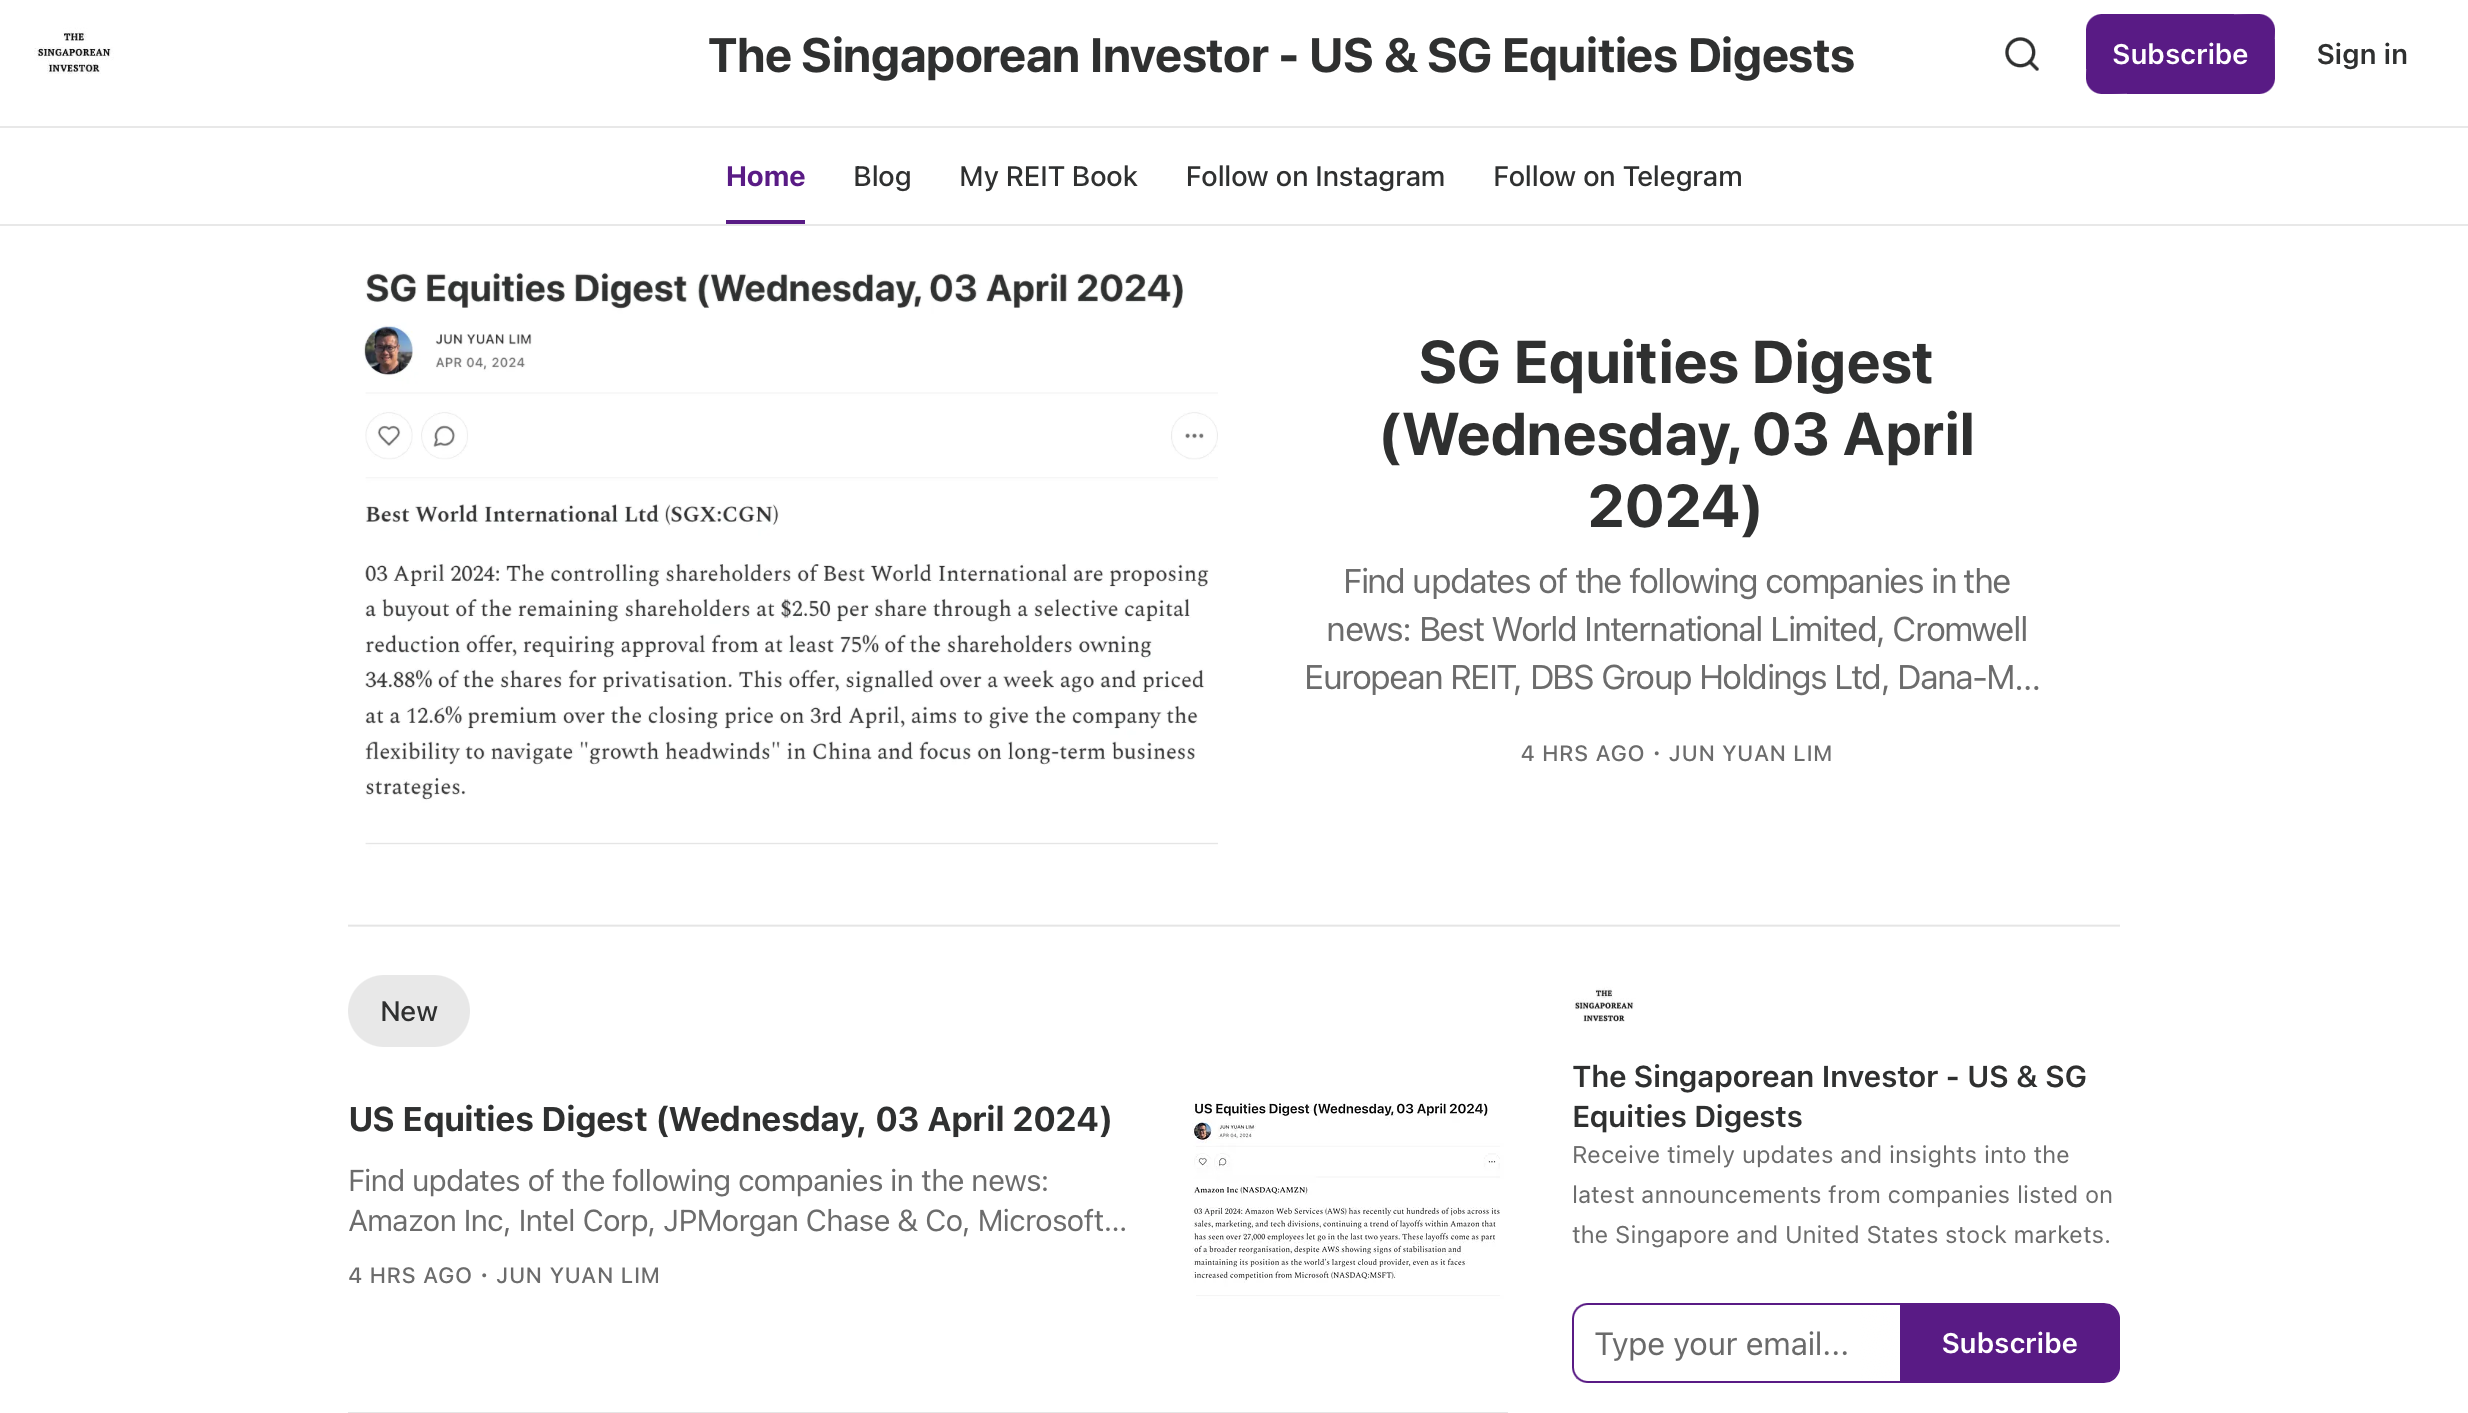 Get Daily Updates on Companies Listed in the US and Singapore Stock Markets on The Singaporean Investor's Substack Page